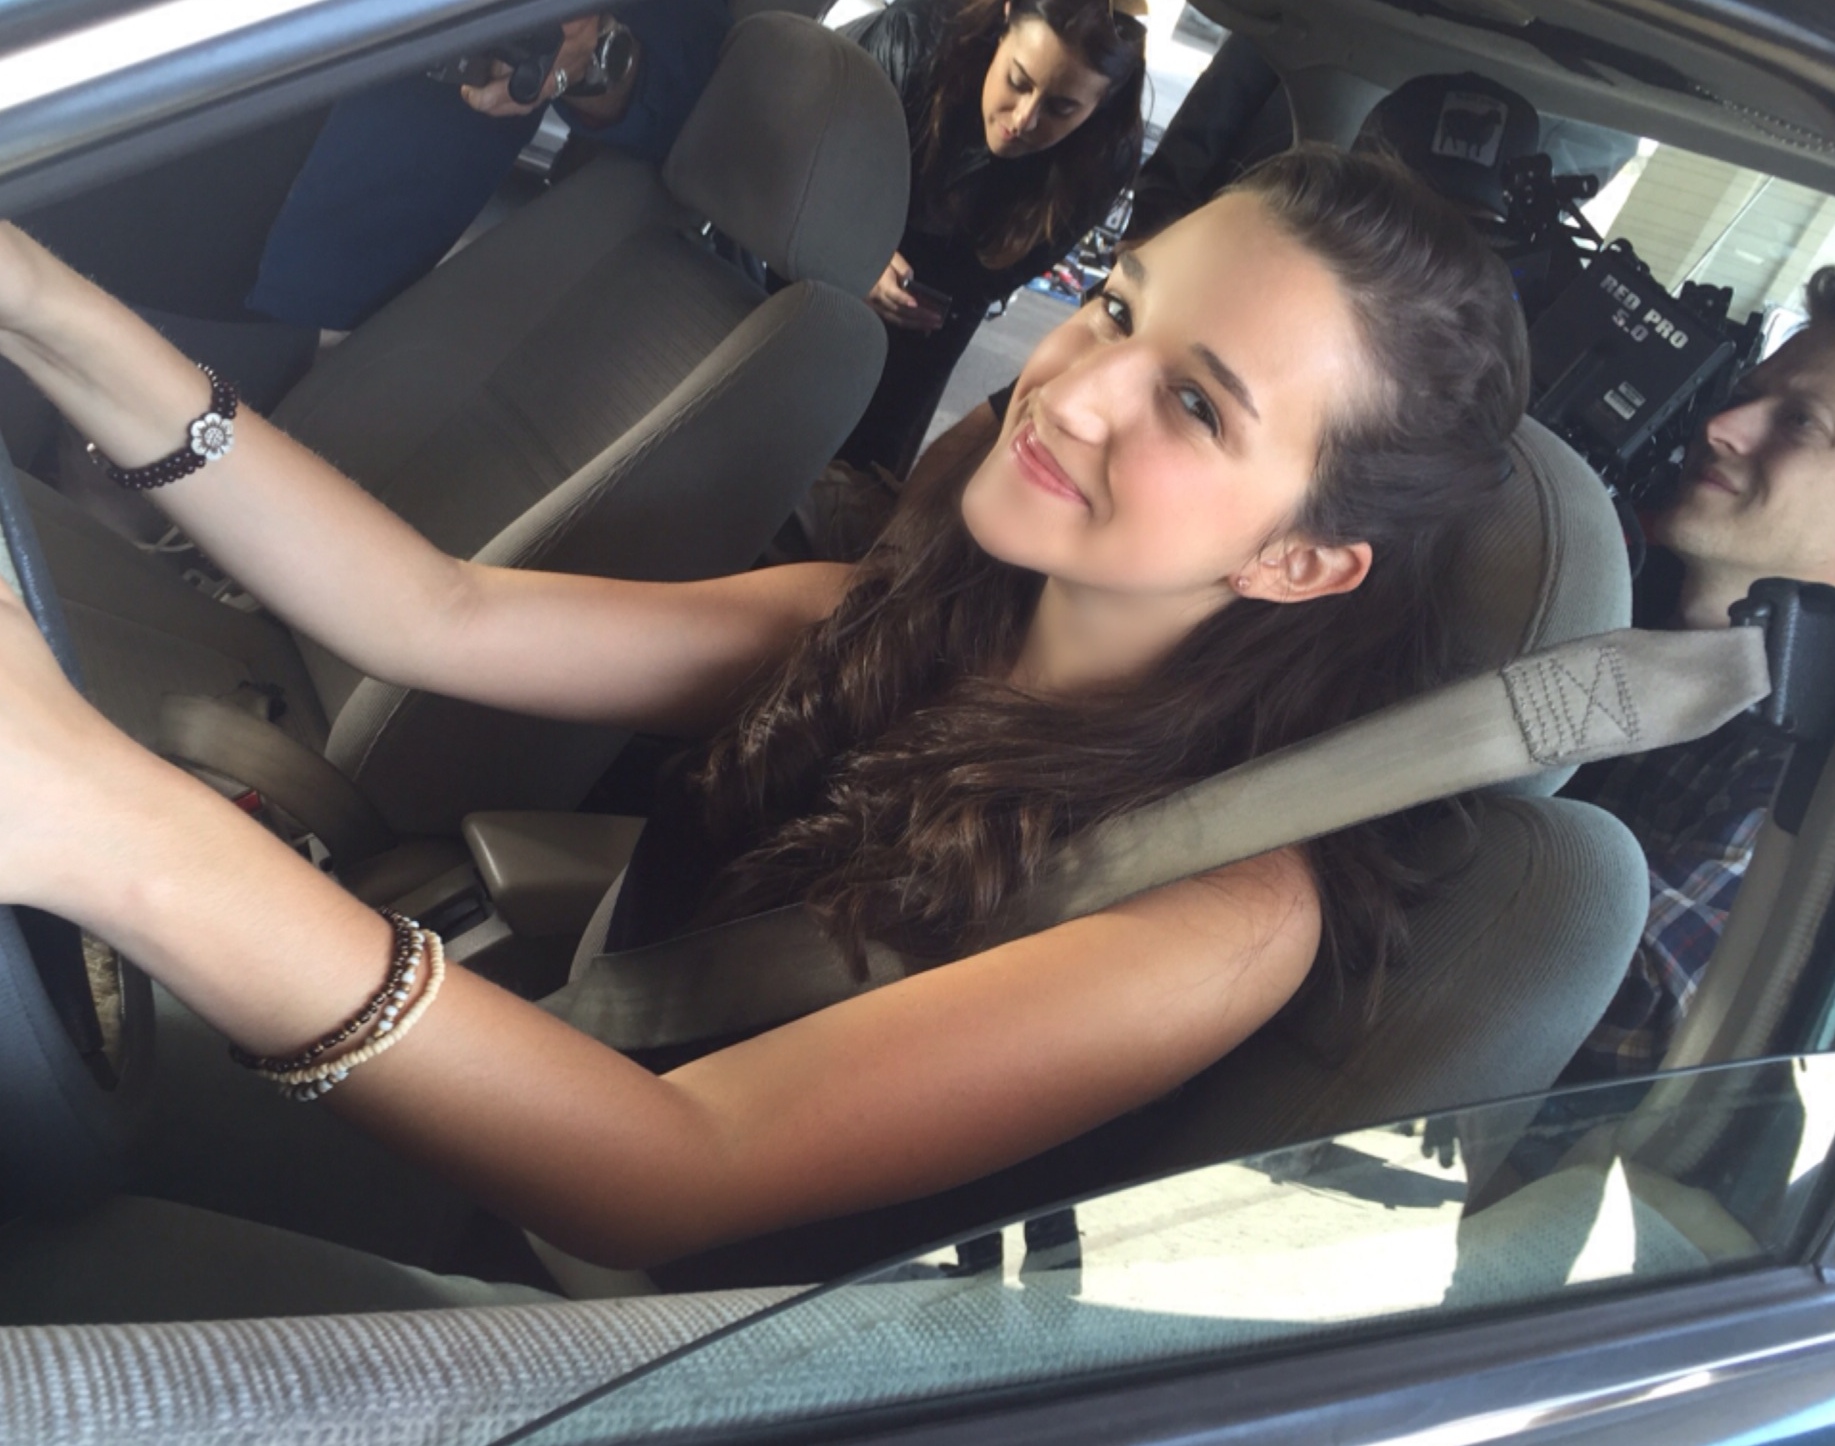 Marisa Davila on the set of the No Texting and Driving PSA